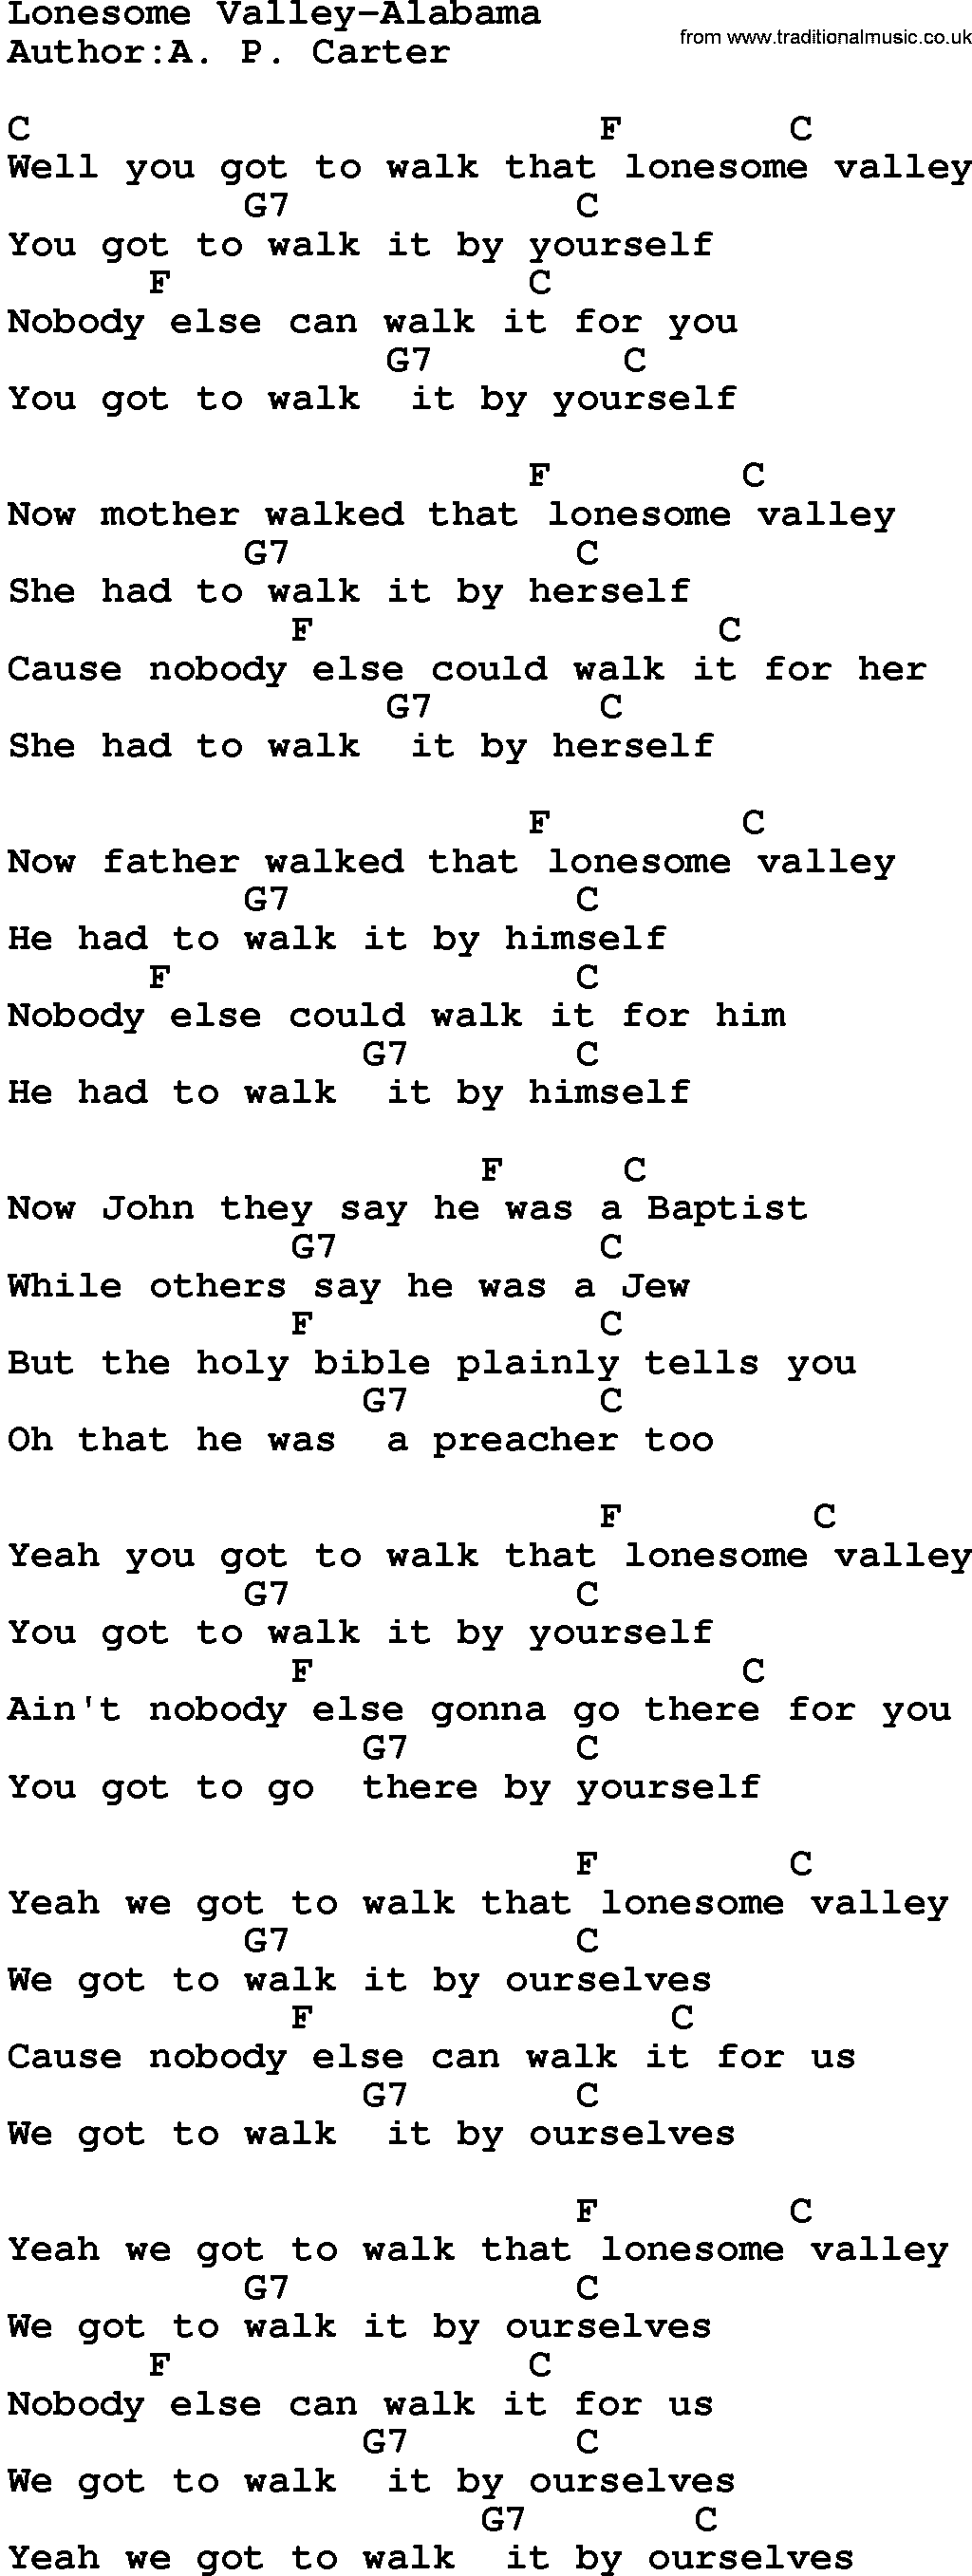 Country music song: Lonesome Valley-Alabama lyrics and chords